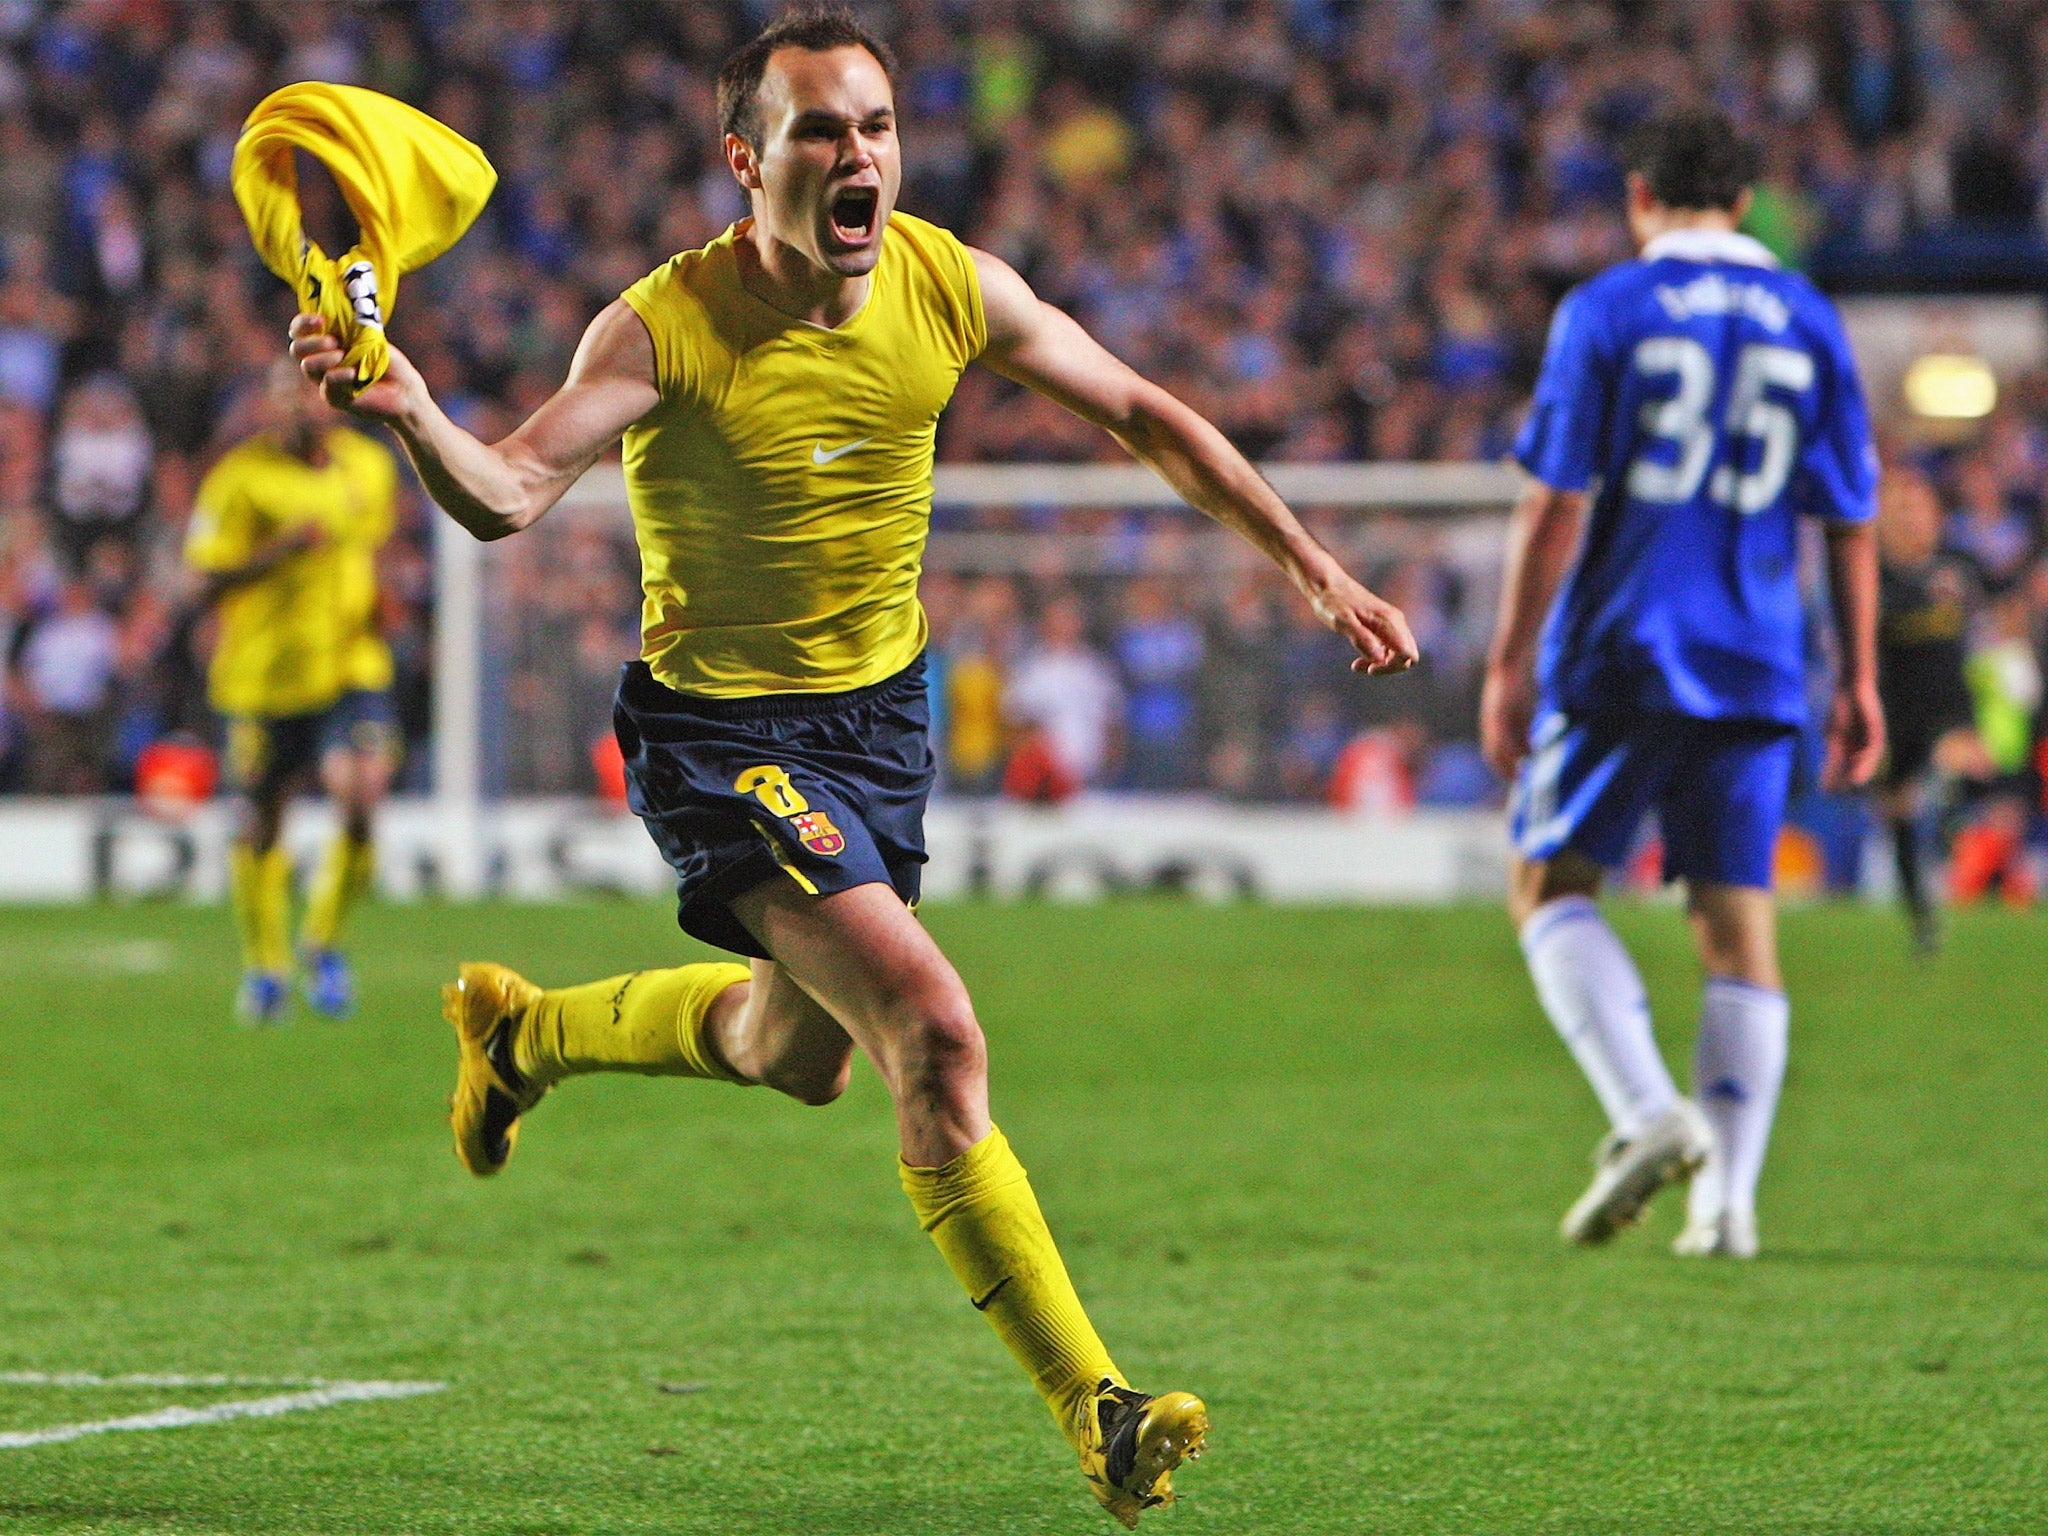 Andres Iniesta’s last-minute goal against Chelsea in 2009 sent Barcelona through to the final